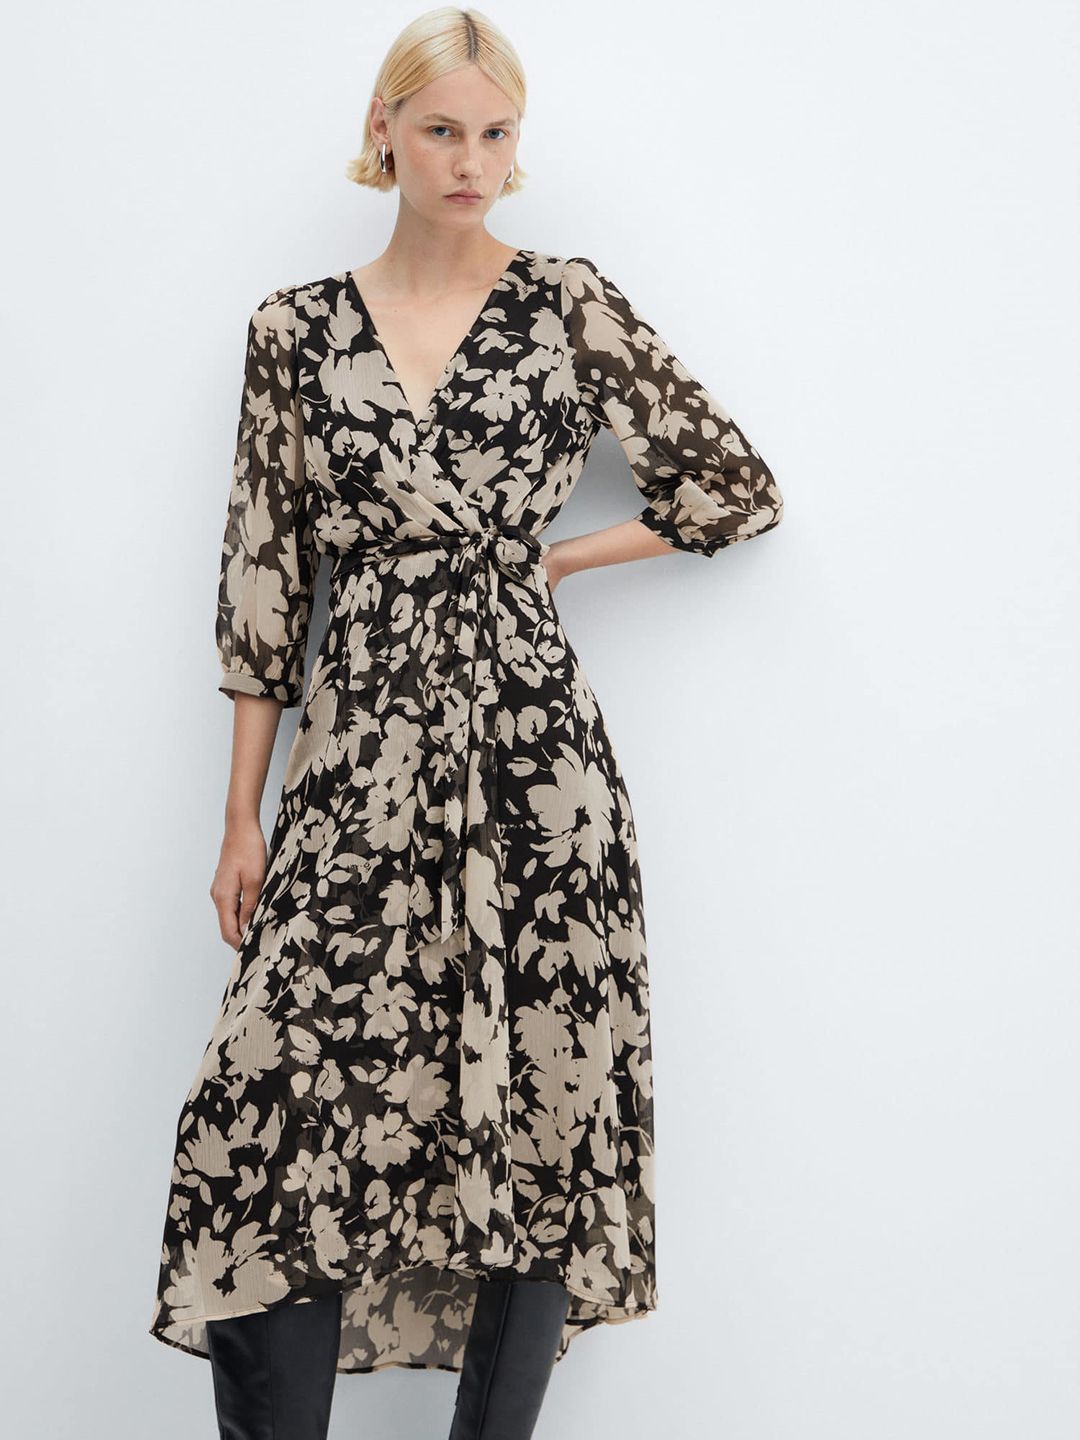 MANGO Floral Print Puff Sleeves Fit & Flare Midi Dress Price in India